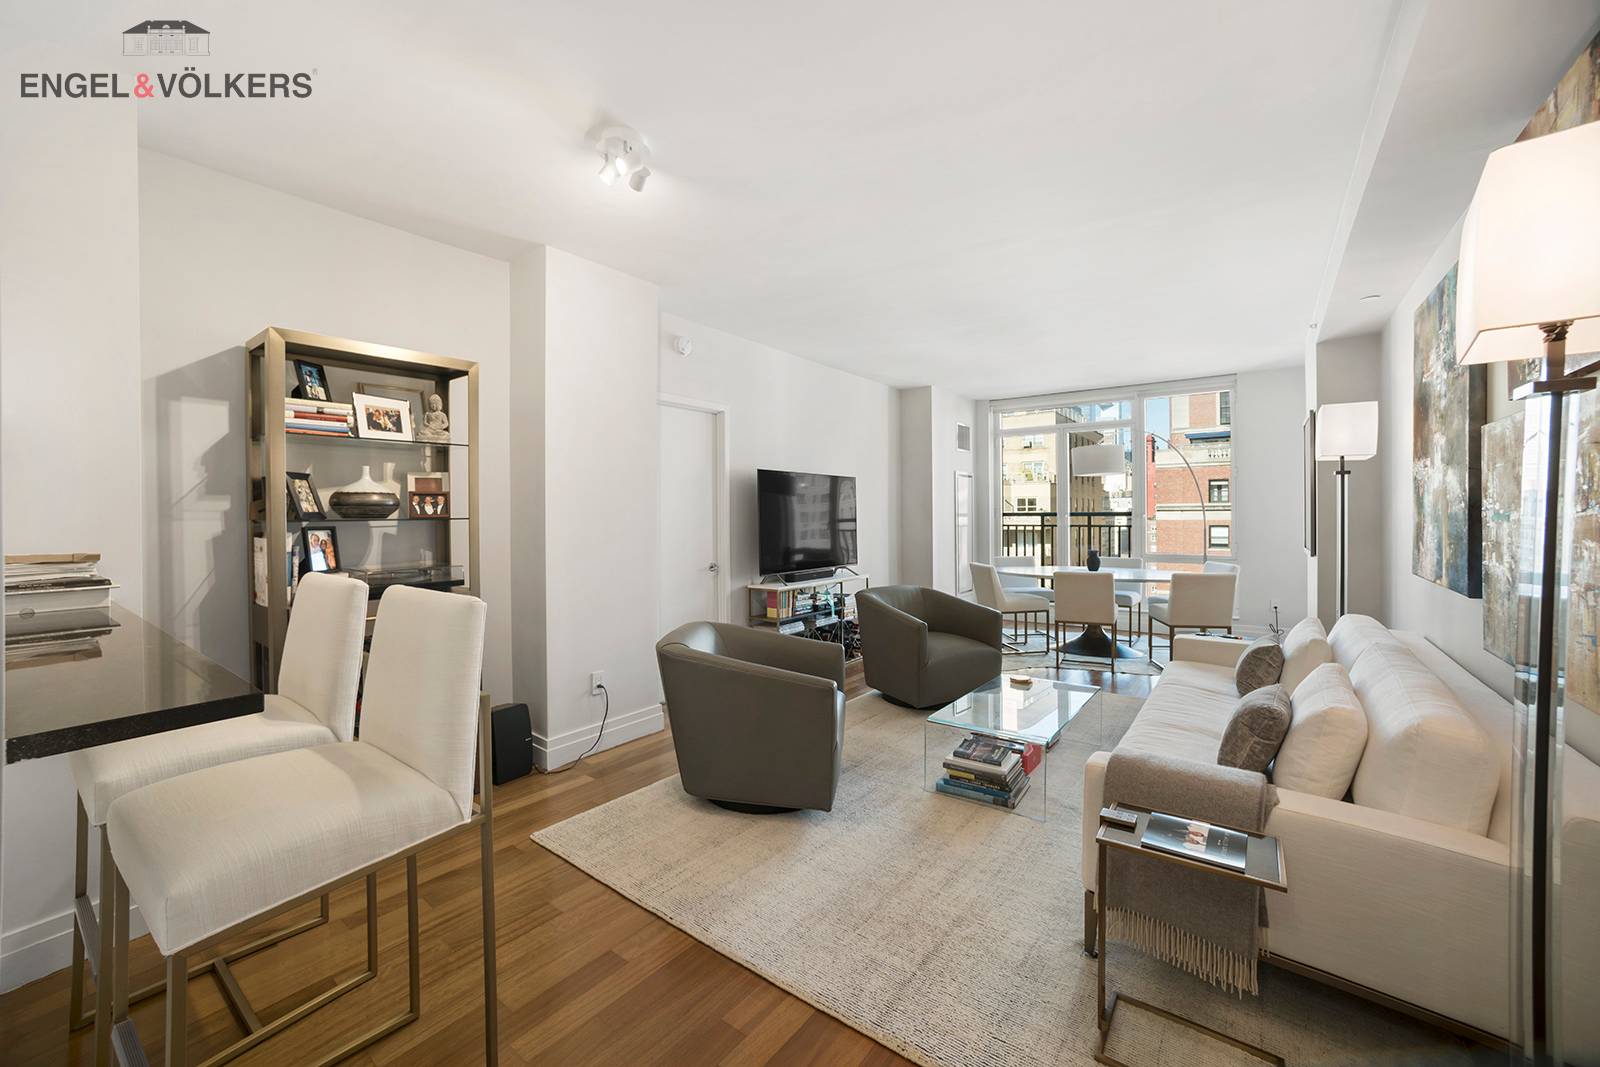 Enjoy breathtaking city views from this magnificent Park Avenue 2 bedroom, 2.